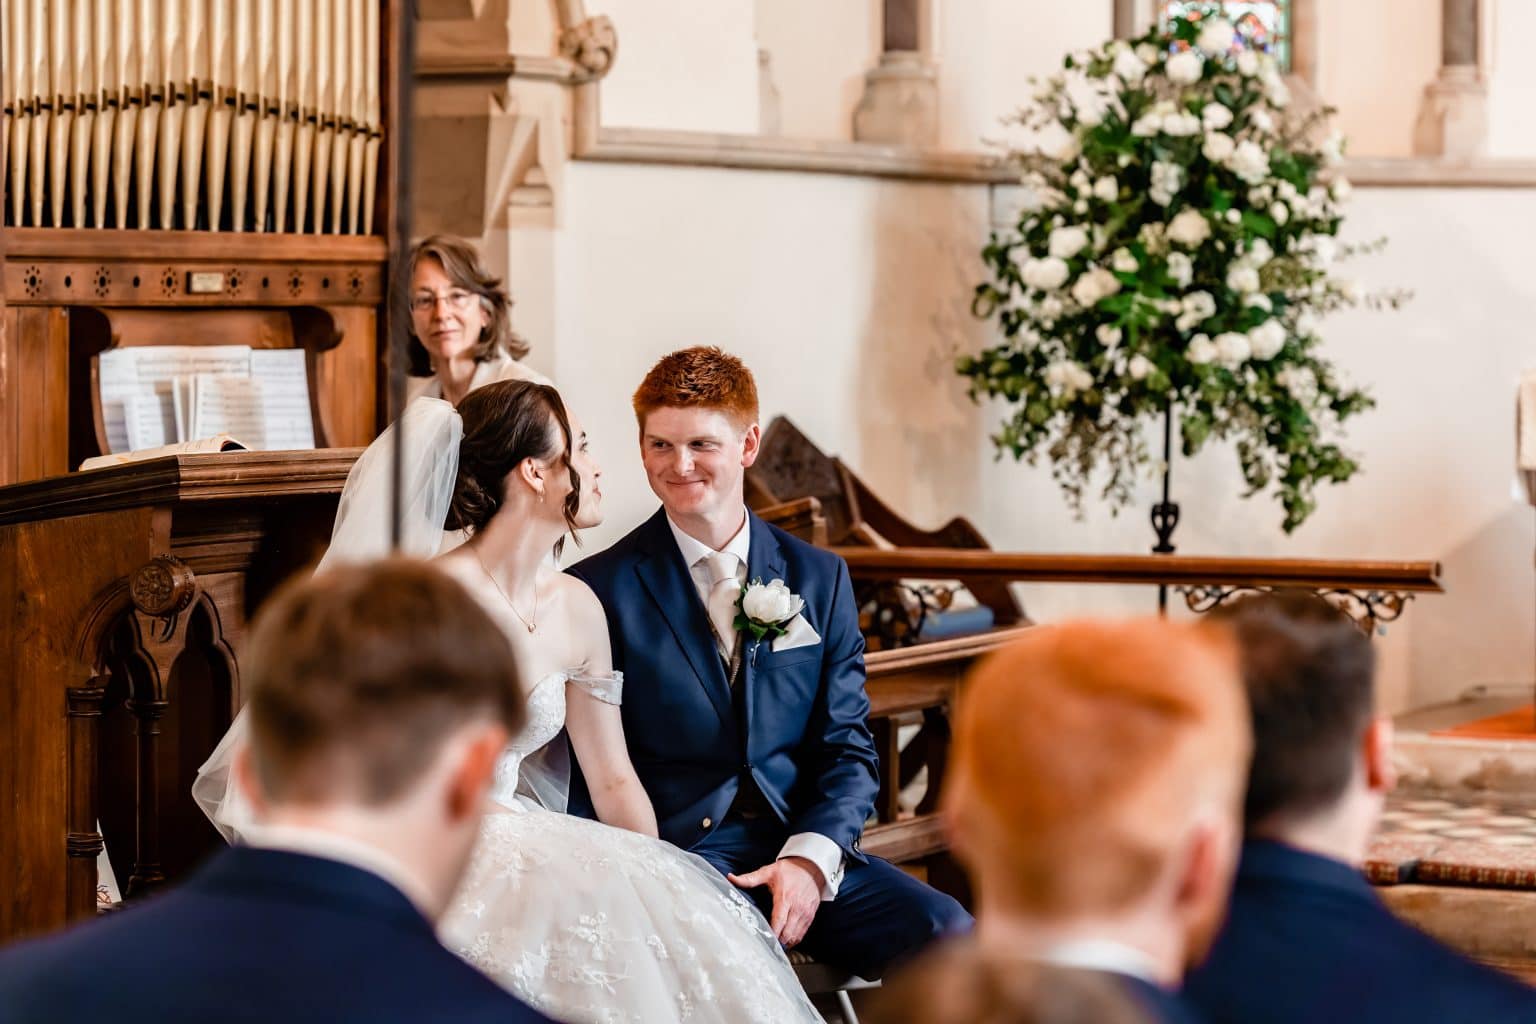 Couple smiling at each other inside the church